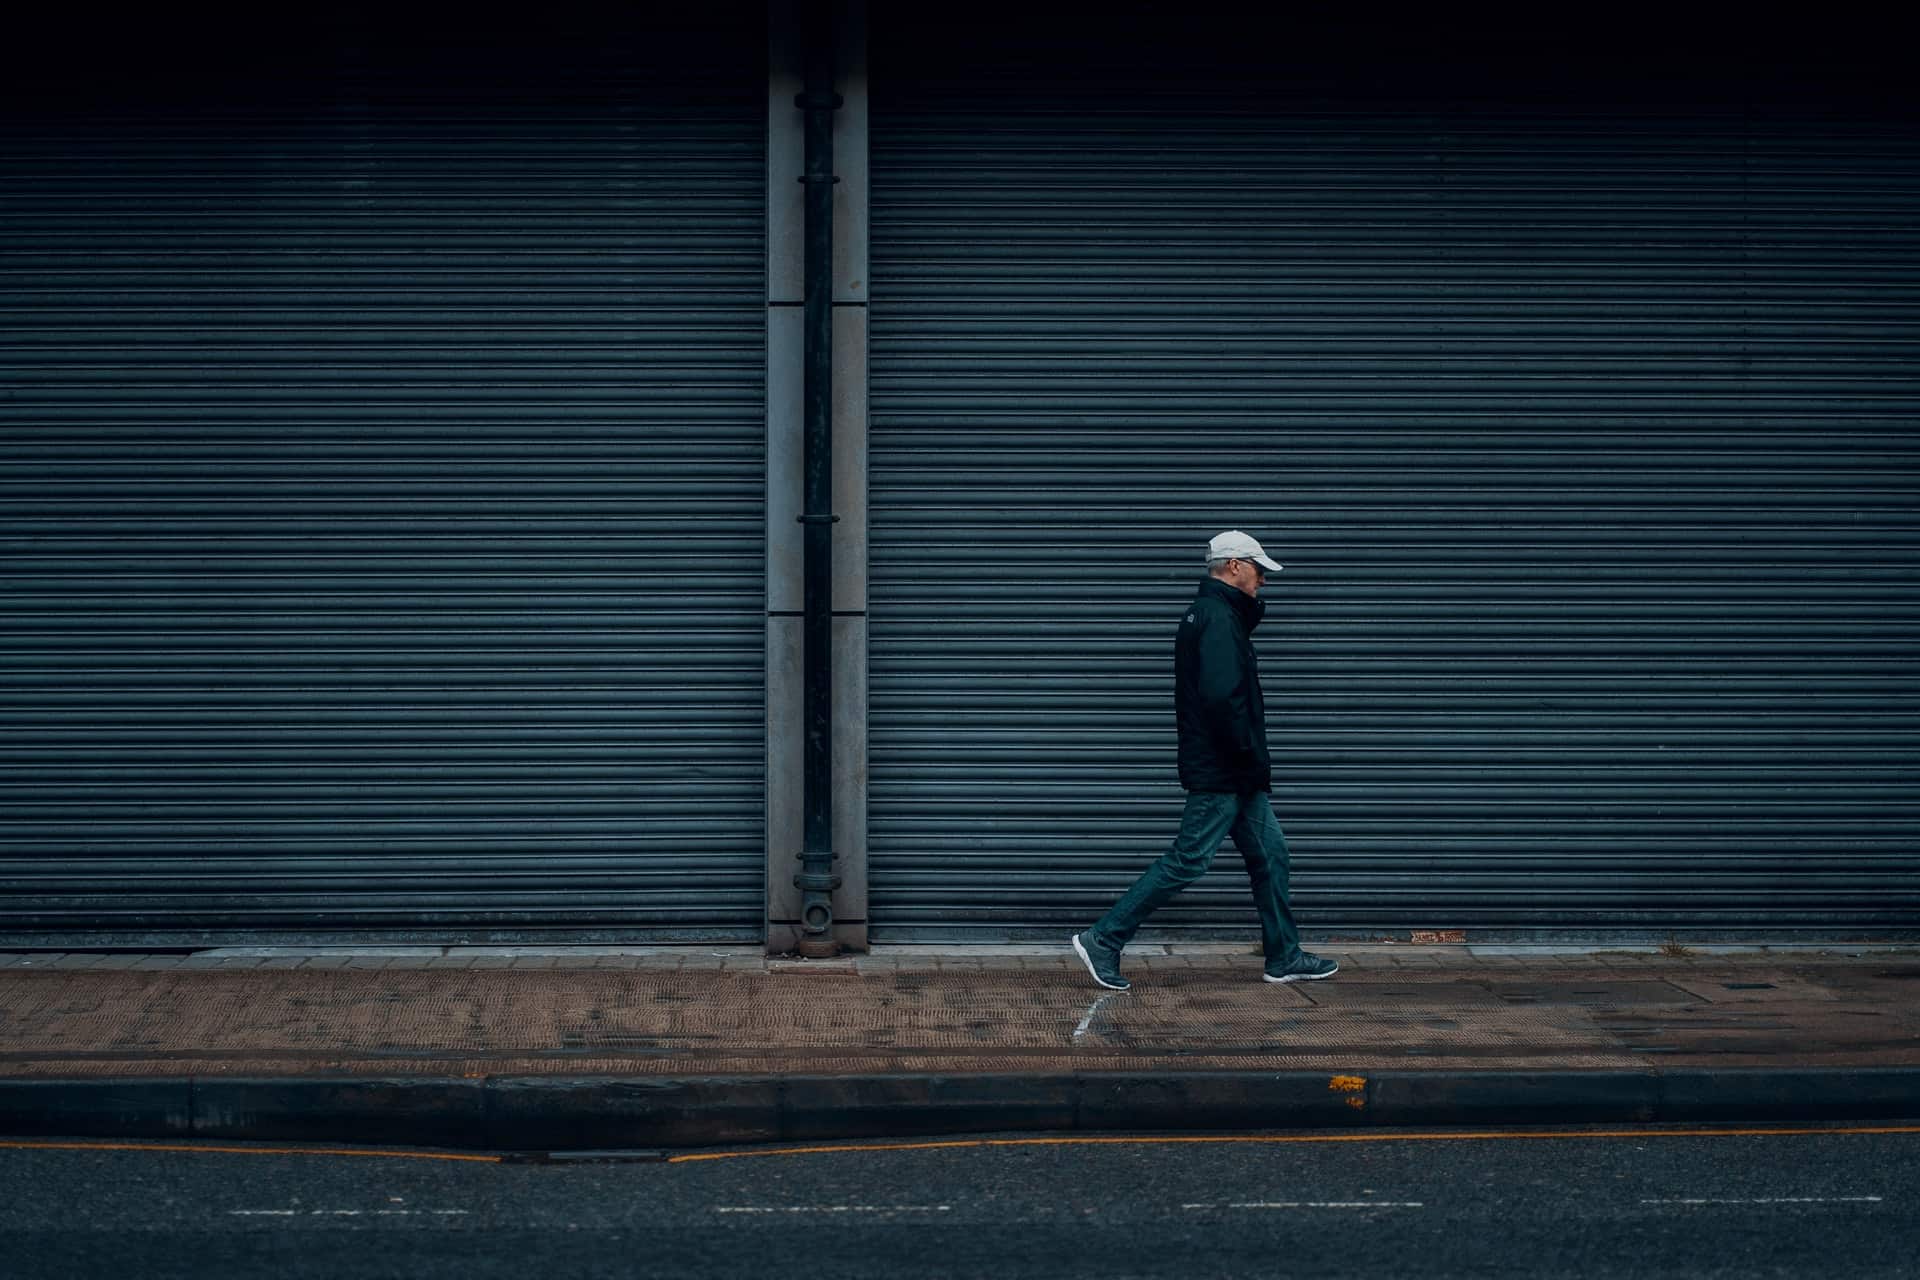 A man wearing a white hat and black jacket walking on a street pass a wall of shutters.